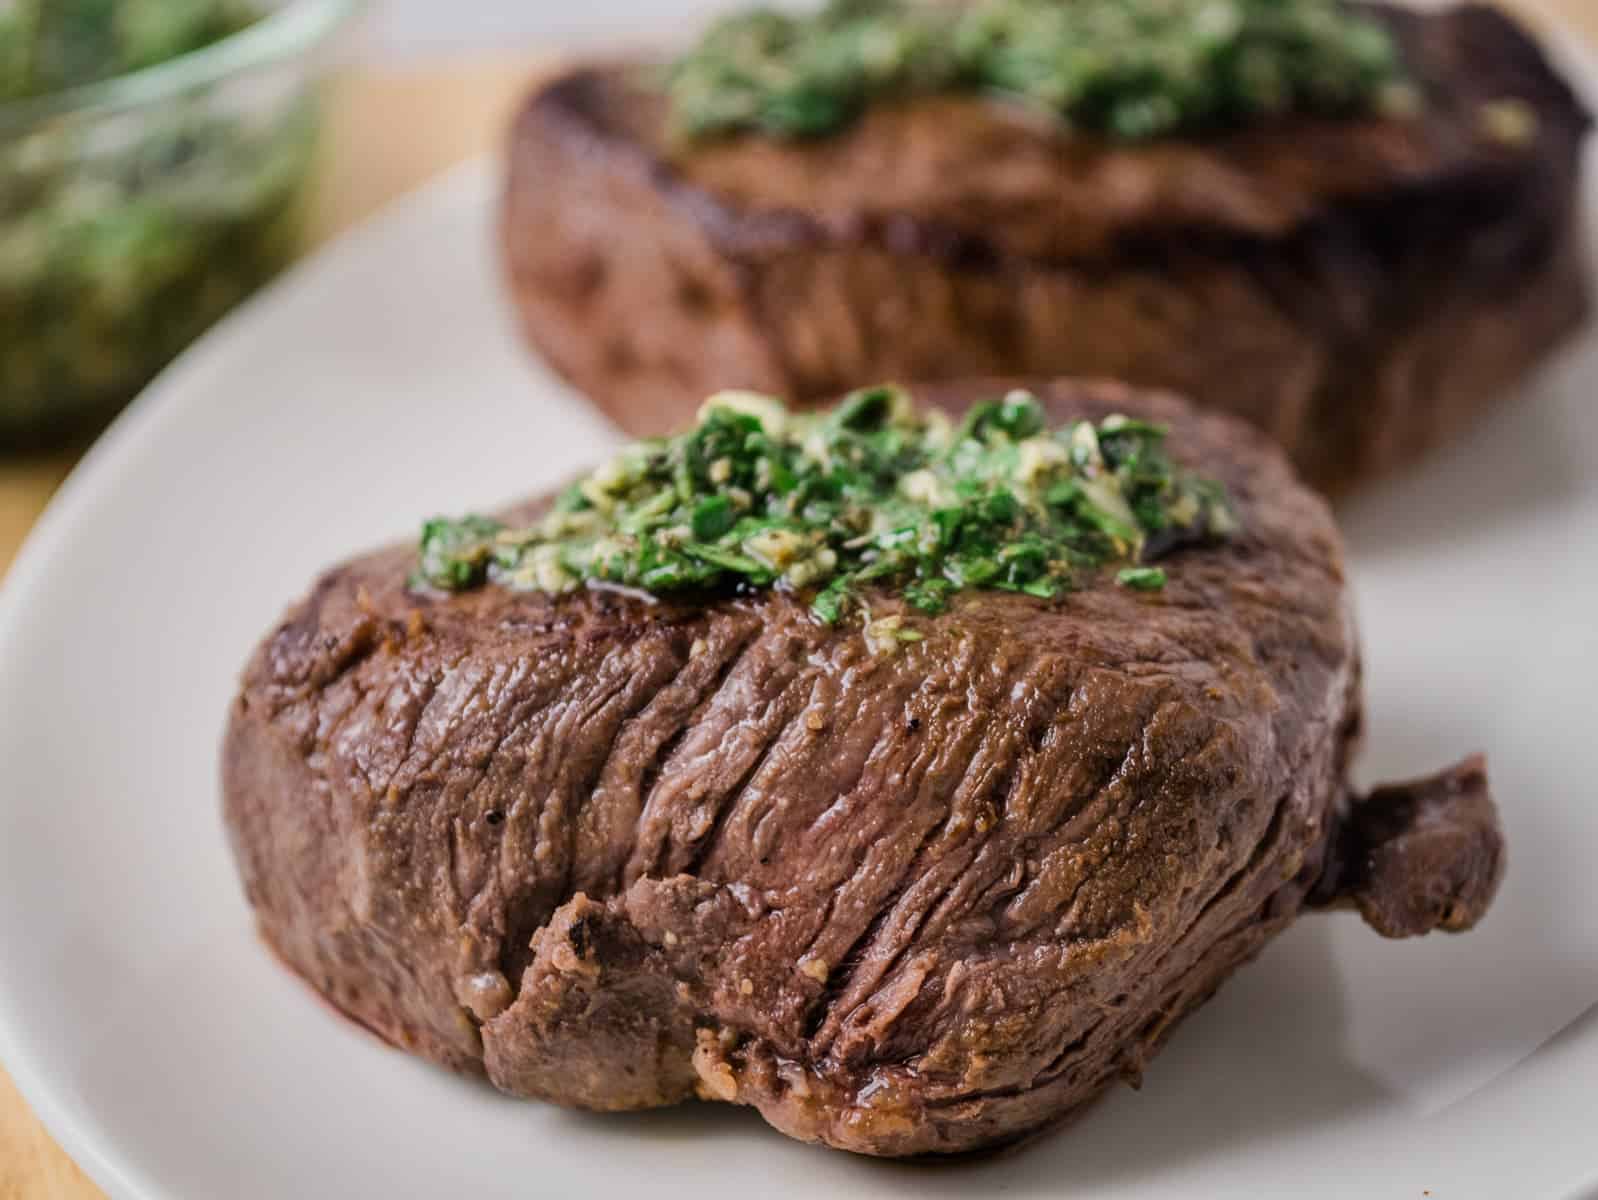 Two steaks with pesto sauce on a plate.